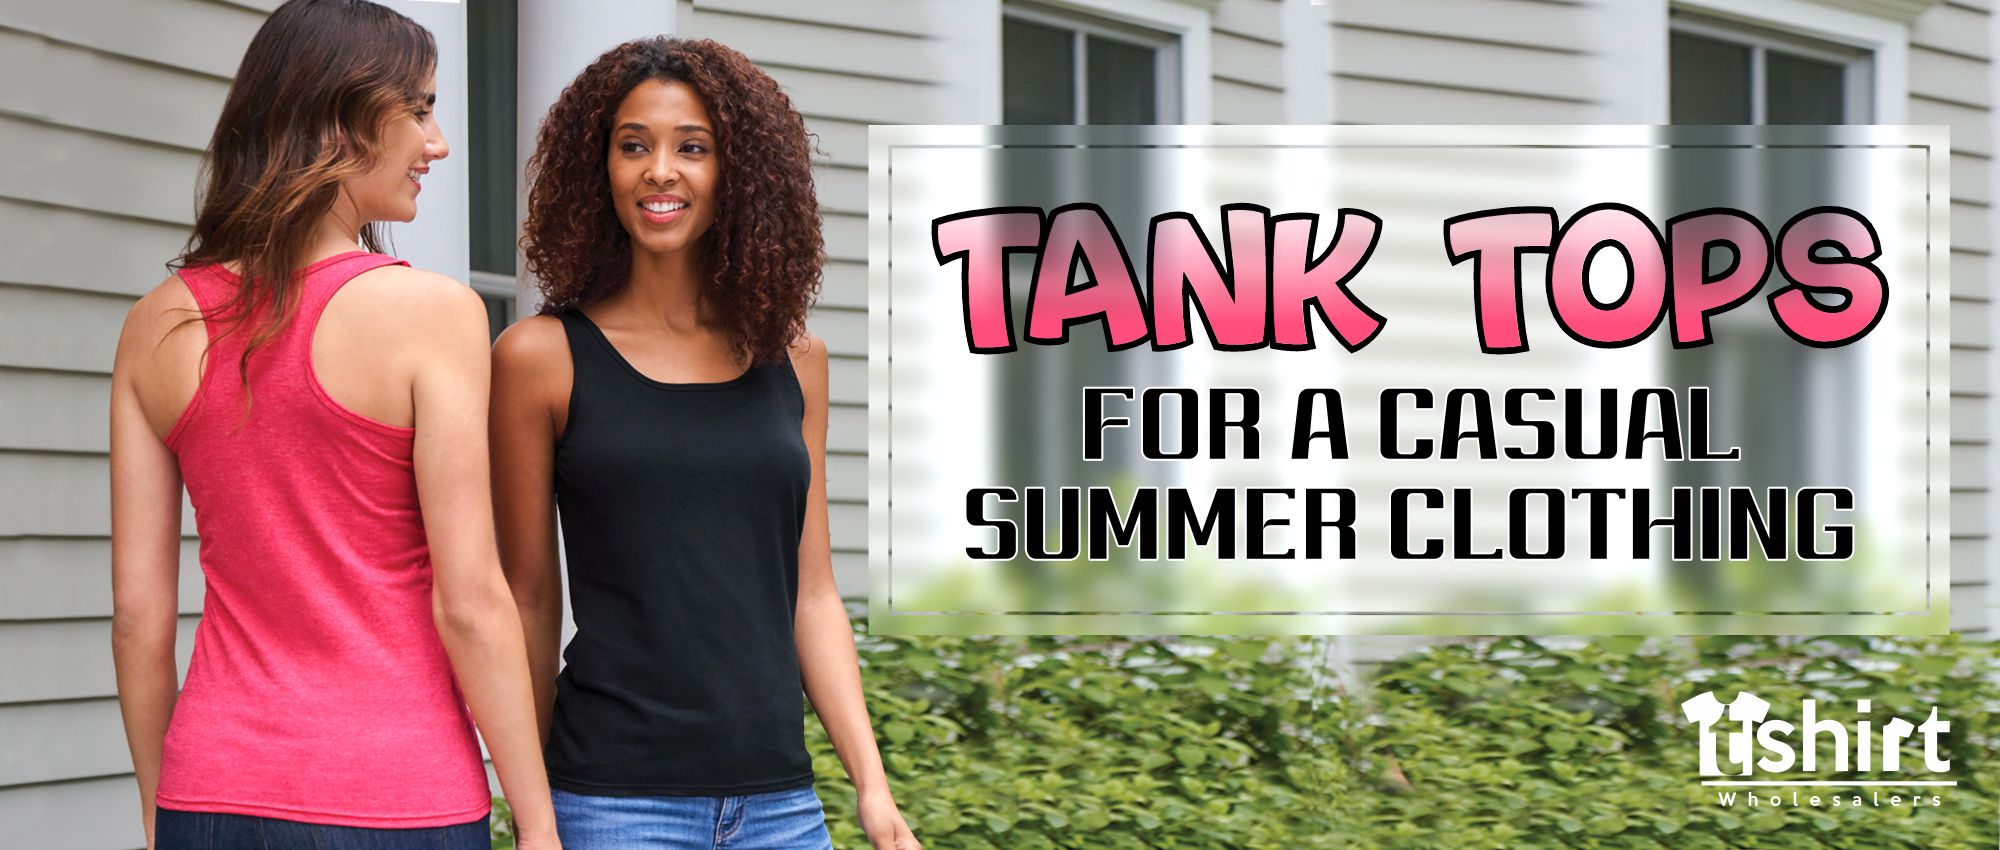 TANK TOPS FOR A CASUAL SUMMER CLOTHING